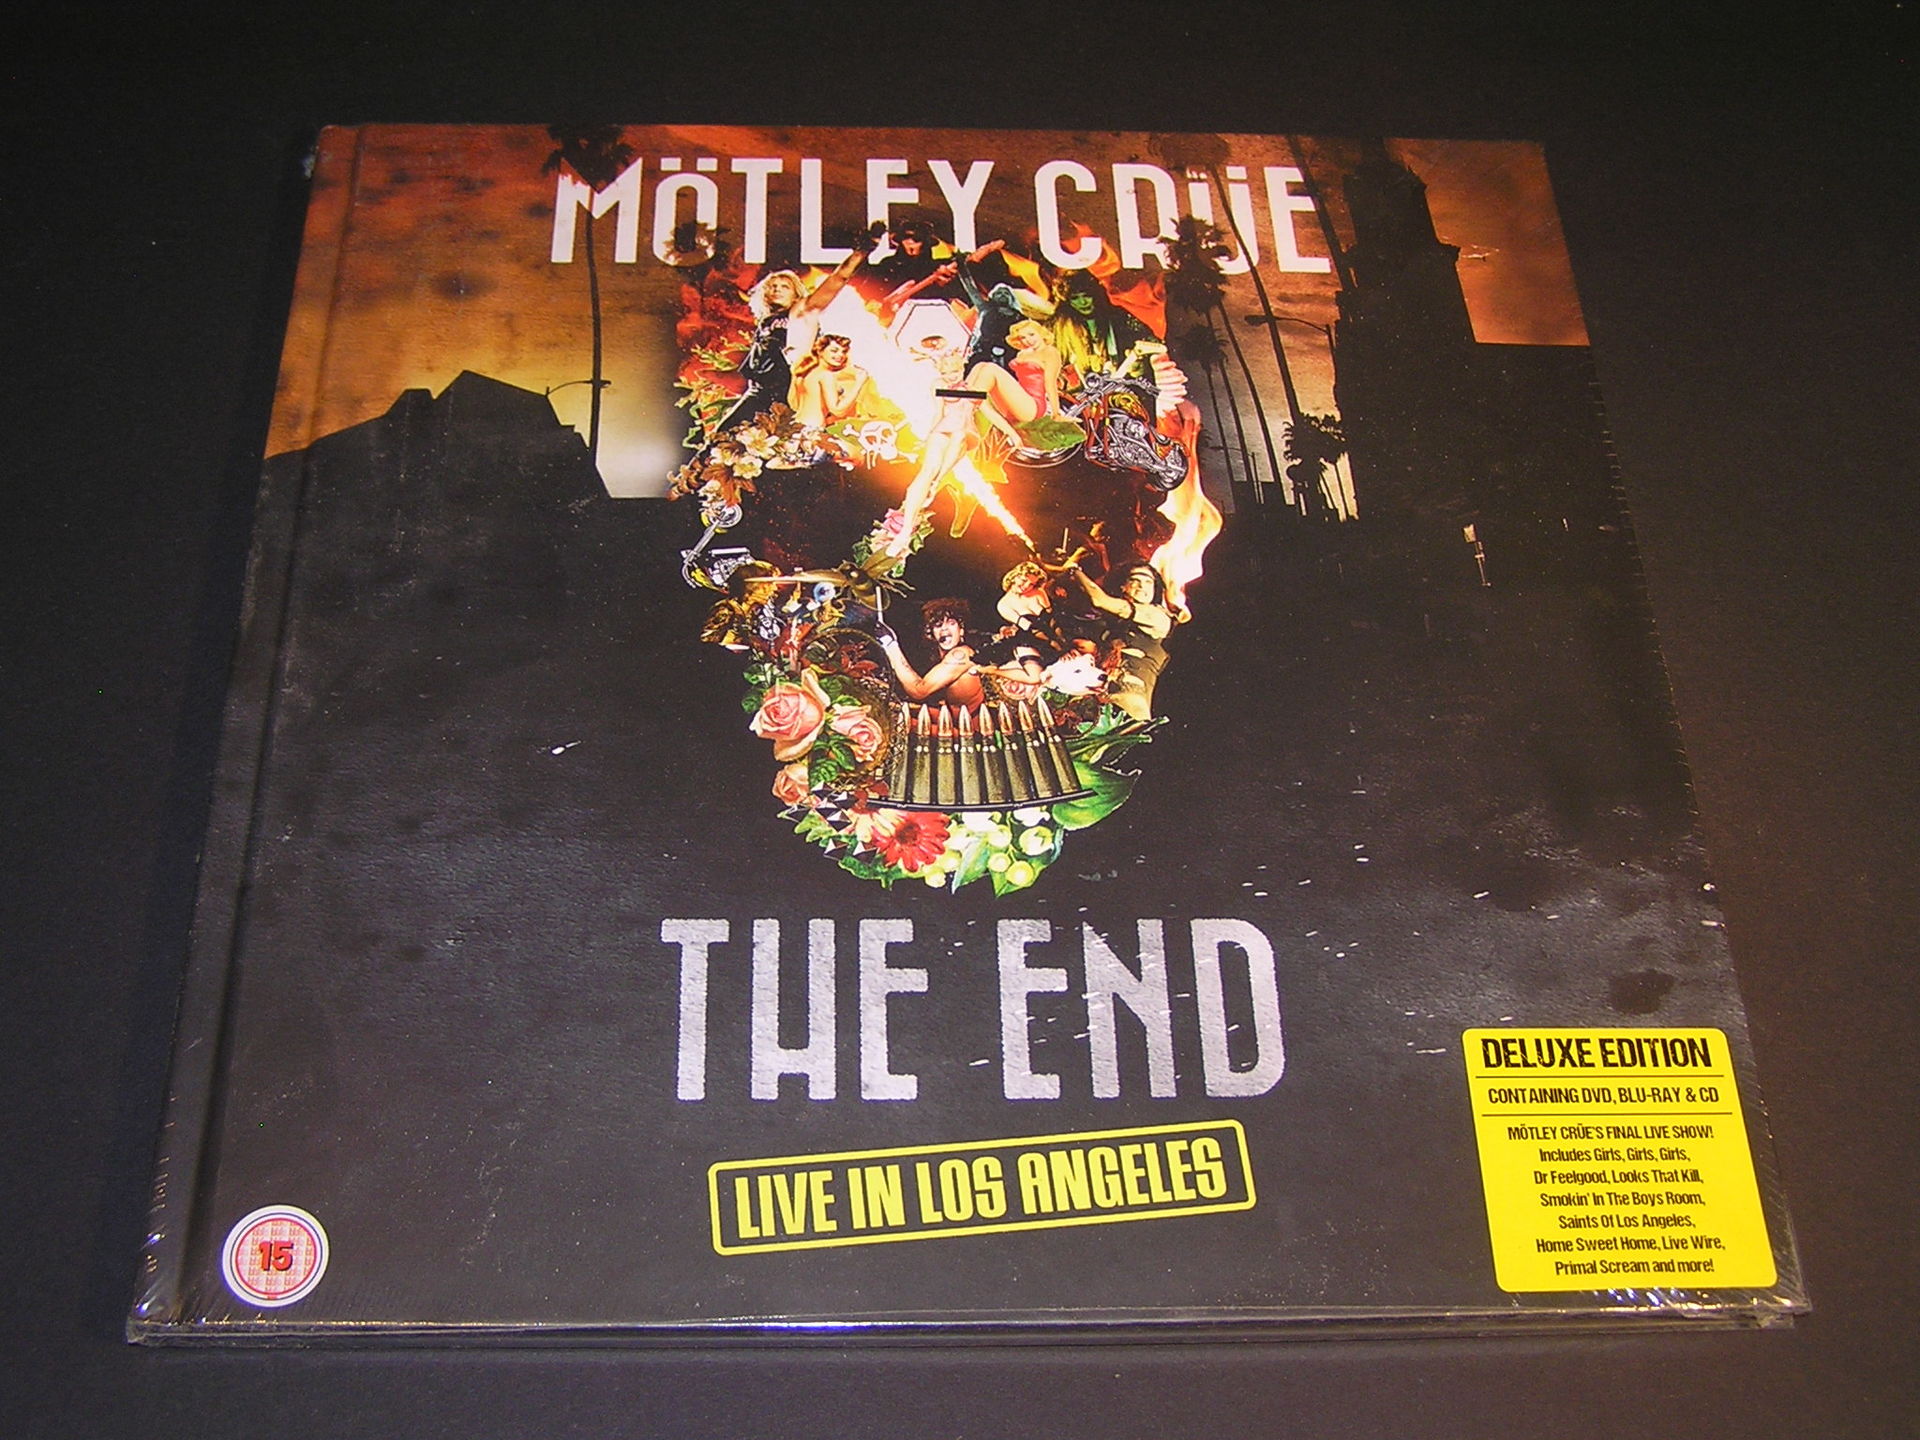 THE　(155443305)　ANGELES　CRÜE　LIVE　IN　LOS　CD/BLU-RAY/DVD　MÖTLEY　END